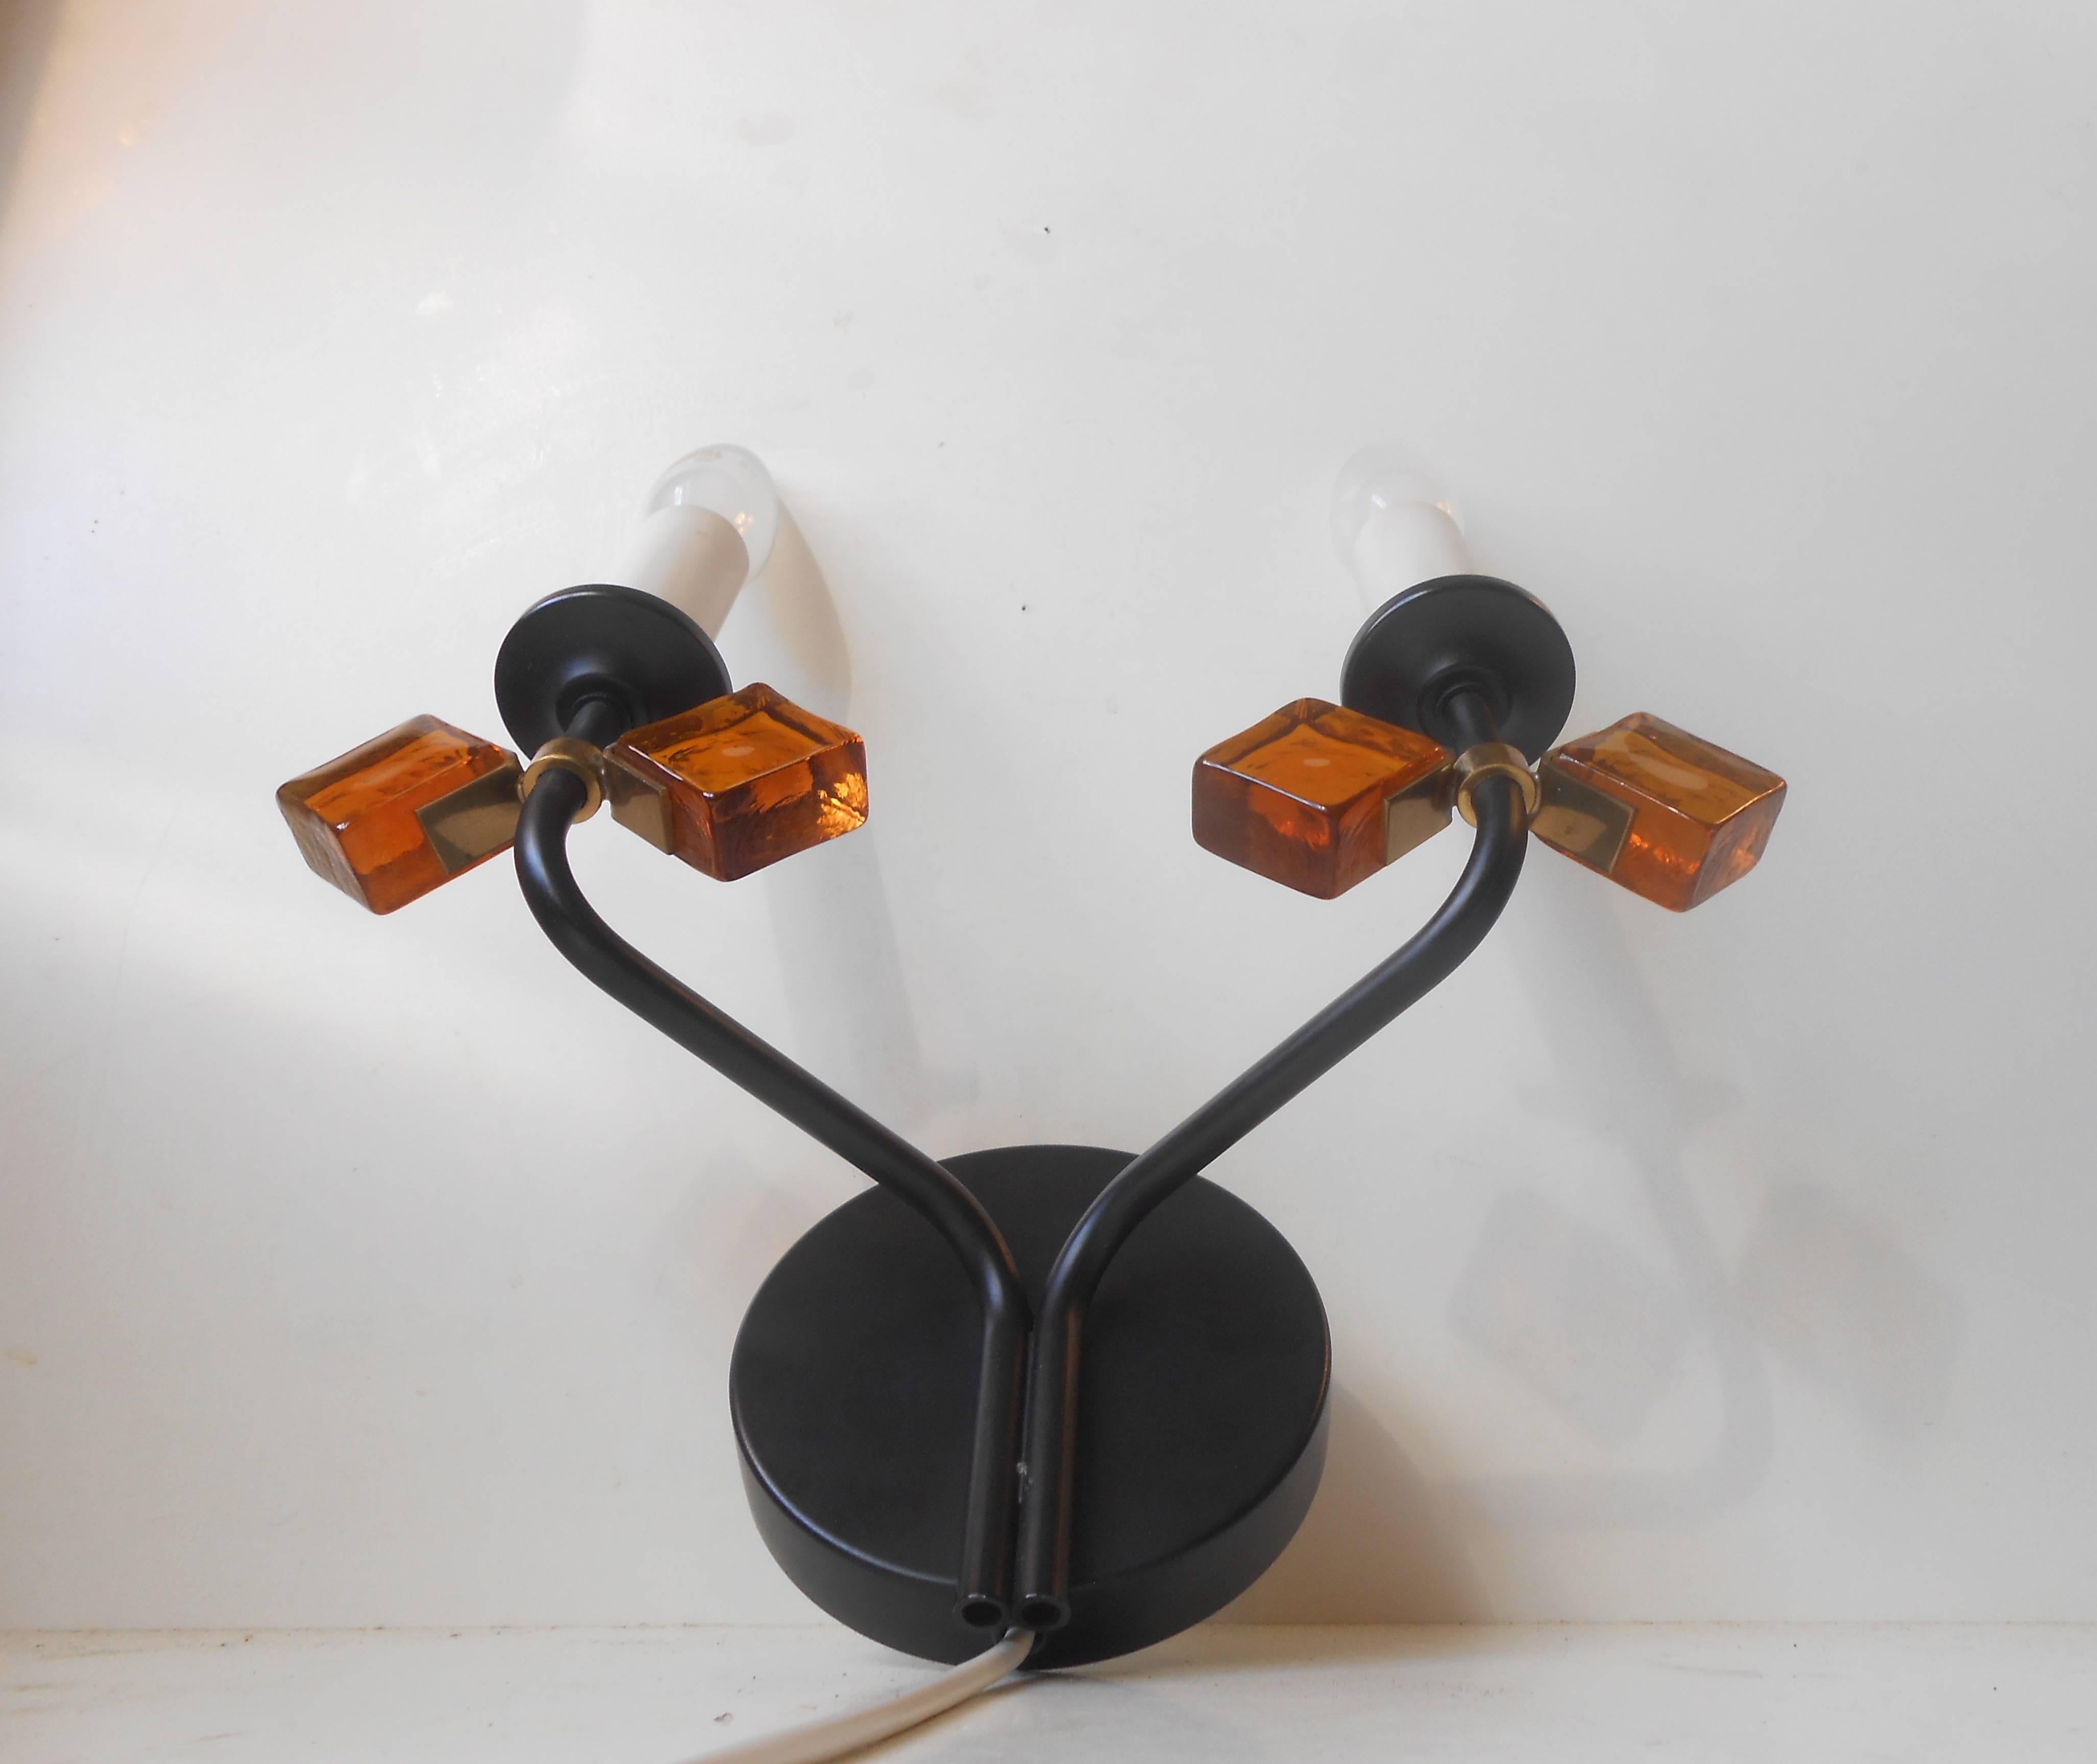 Black-bodied sconce by Holm-Sorensen with rotating brass and amber glass butterfly-shaped settings. Original sticker to the backside. Measurements (approx.): H 12 inches, W 10 inches.